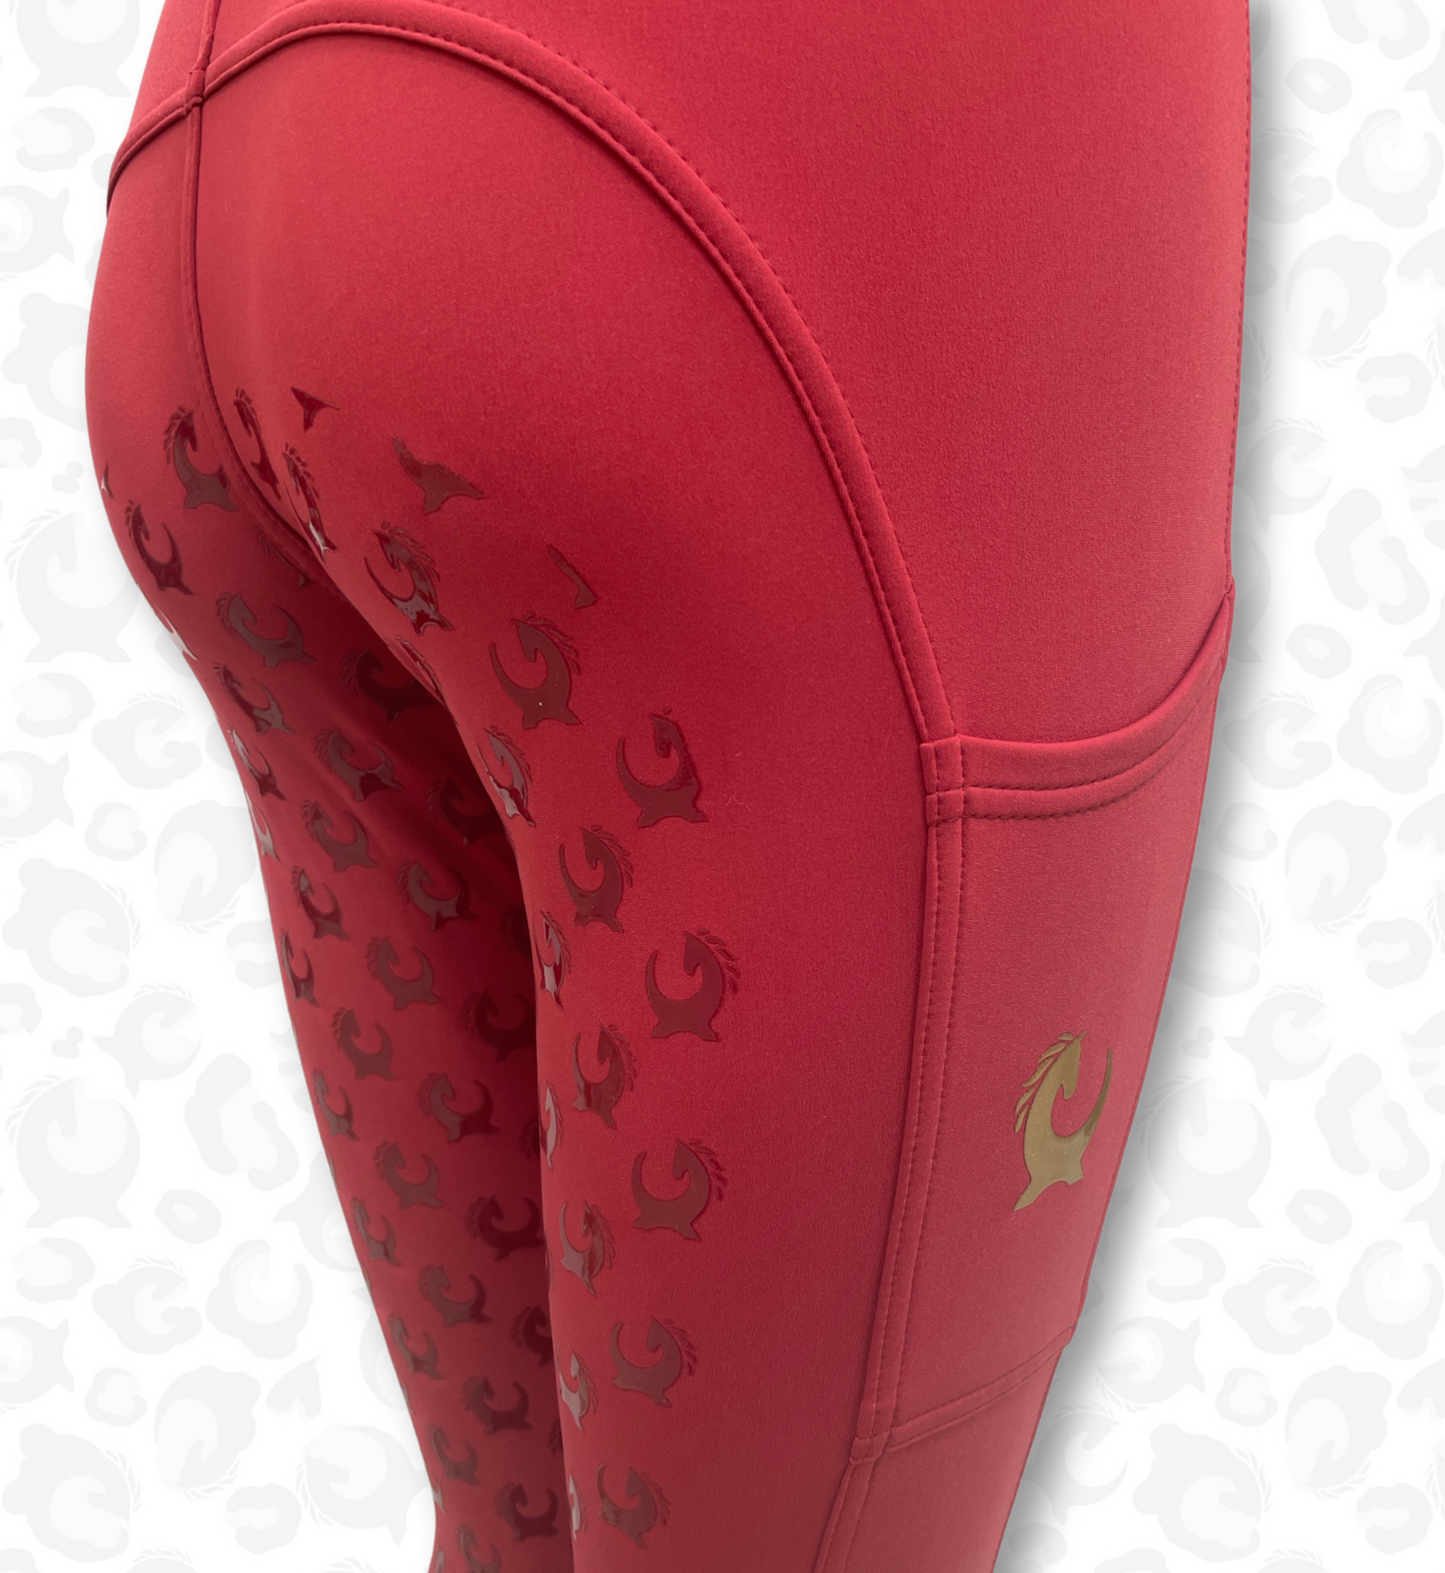 Equiboodle Riding Tights - Berry Fleece Lined XL 30-36”